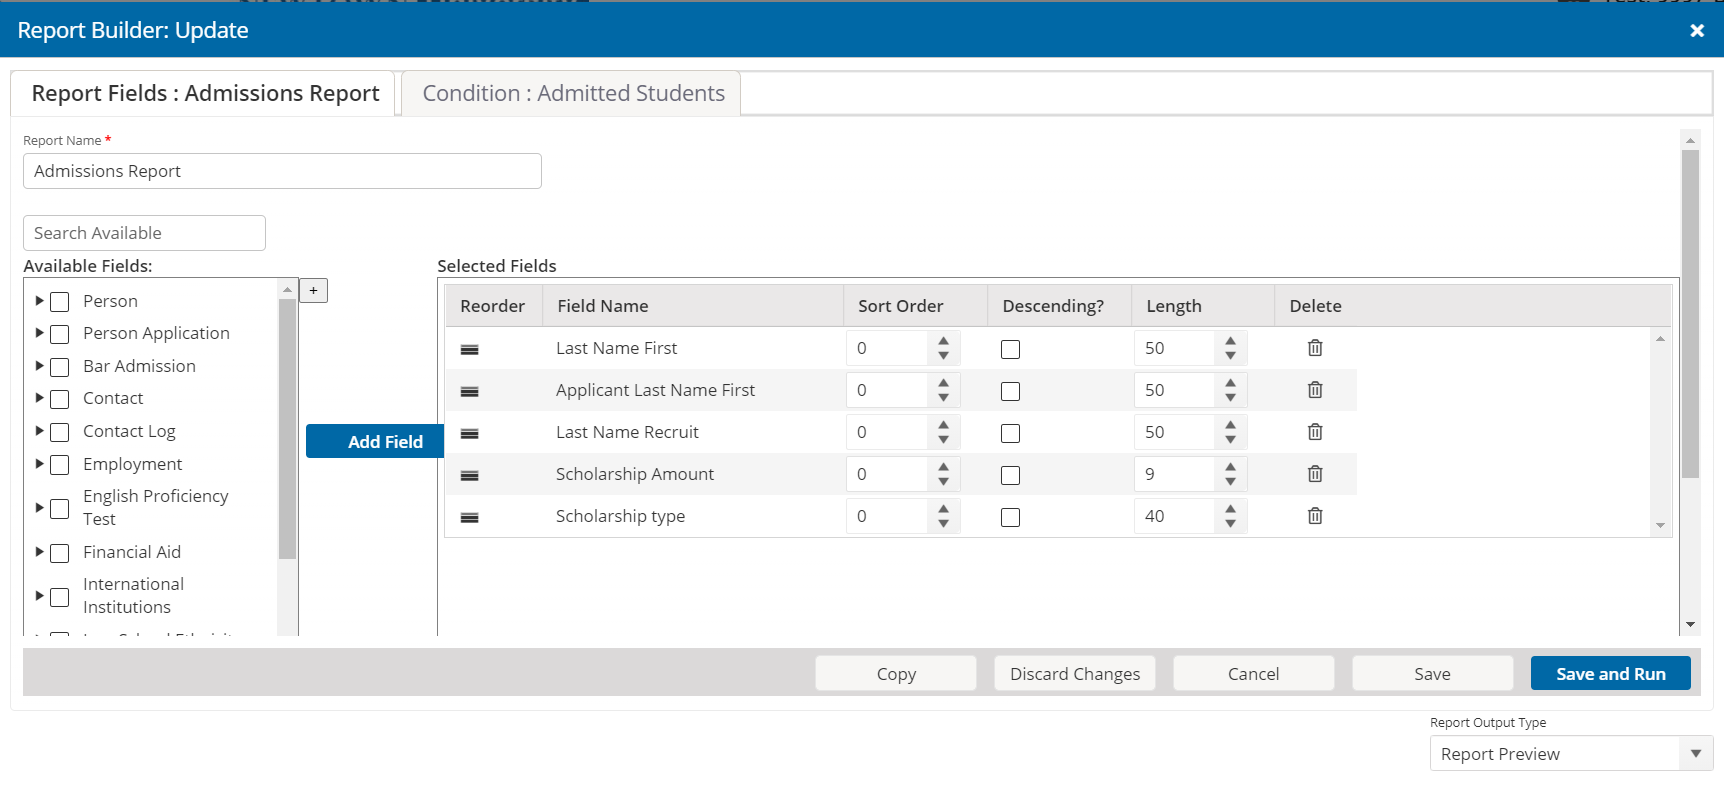 Image shows the Report Builder window and the files you complete to build a report and report conditions.